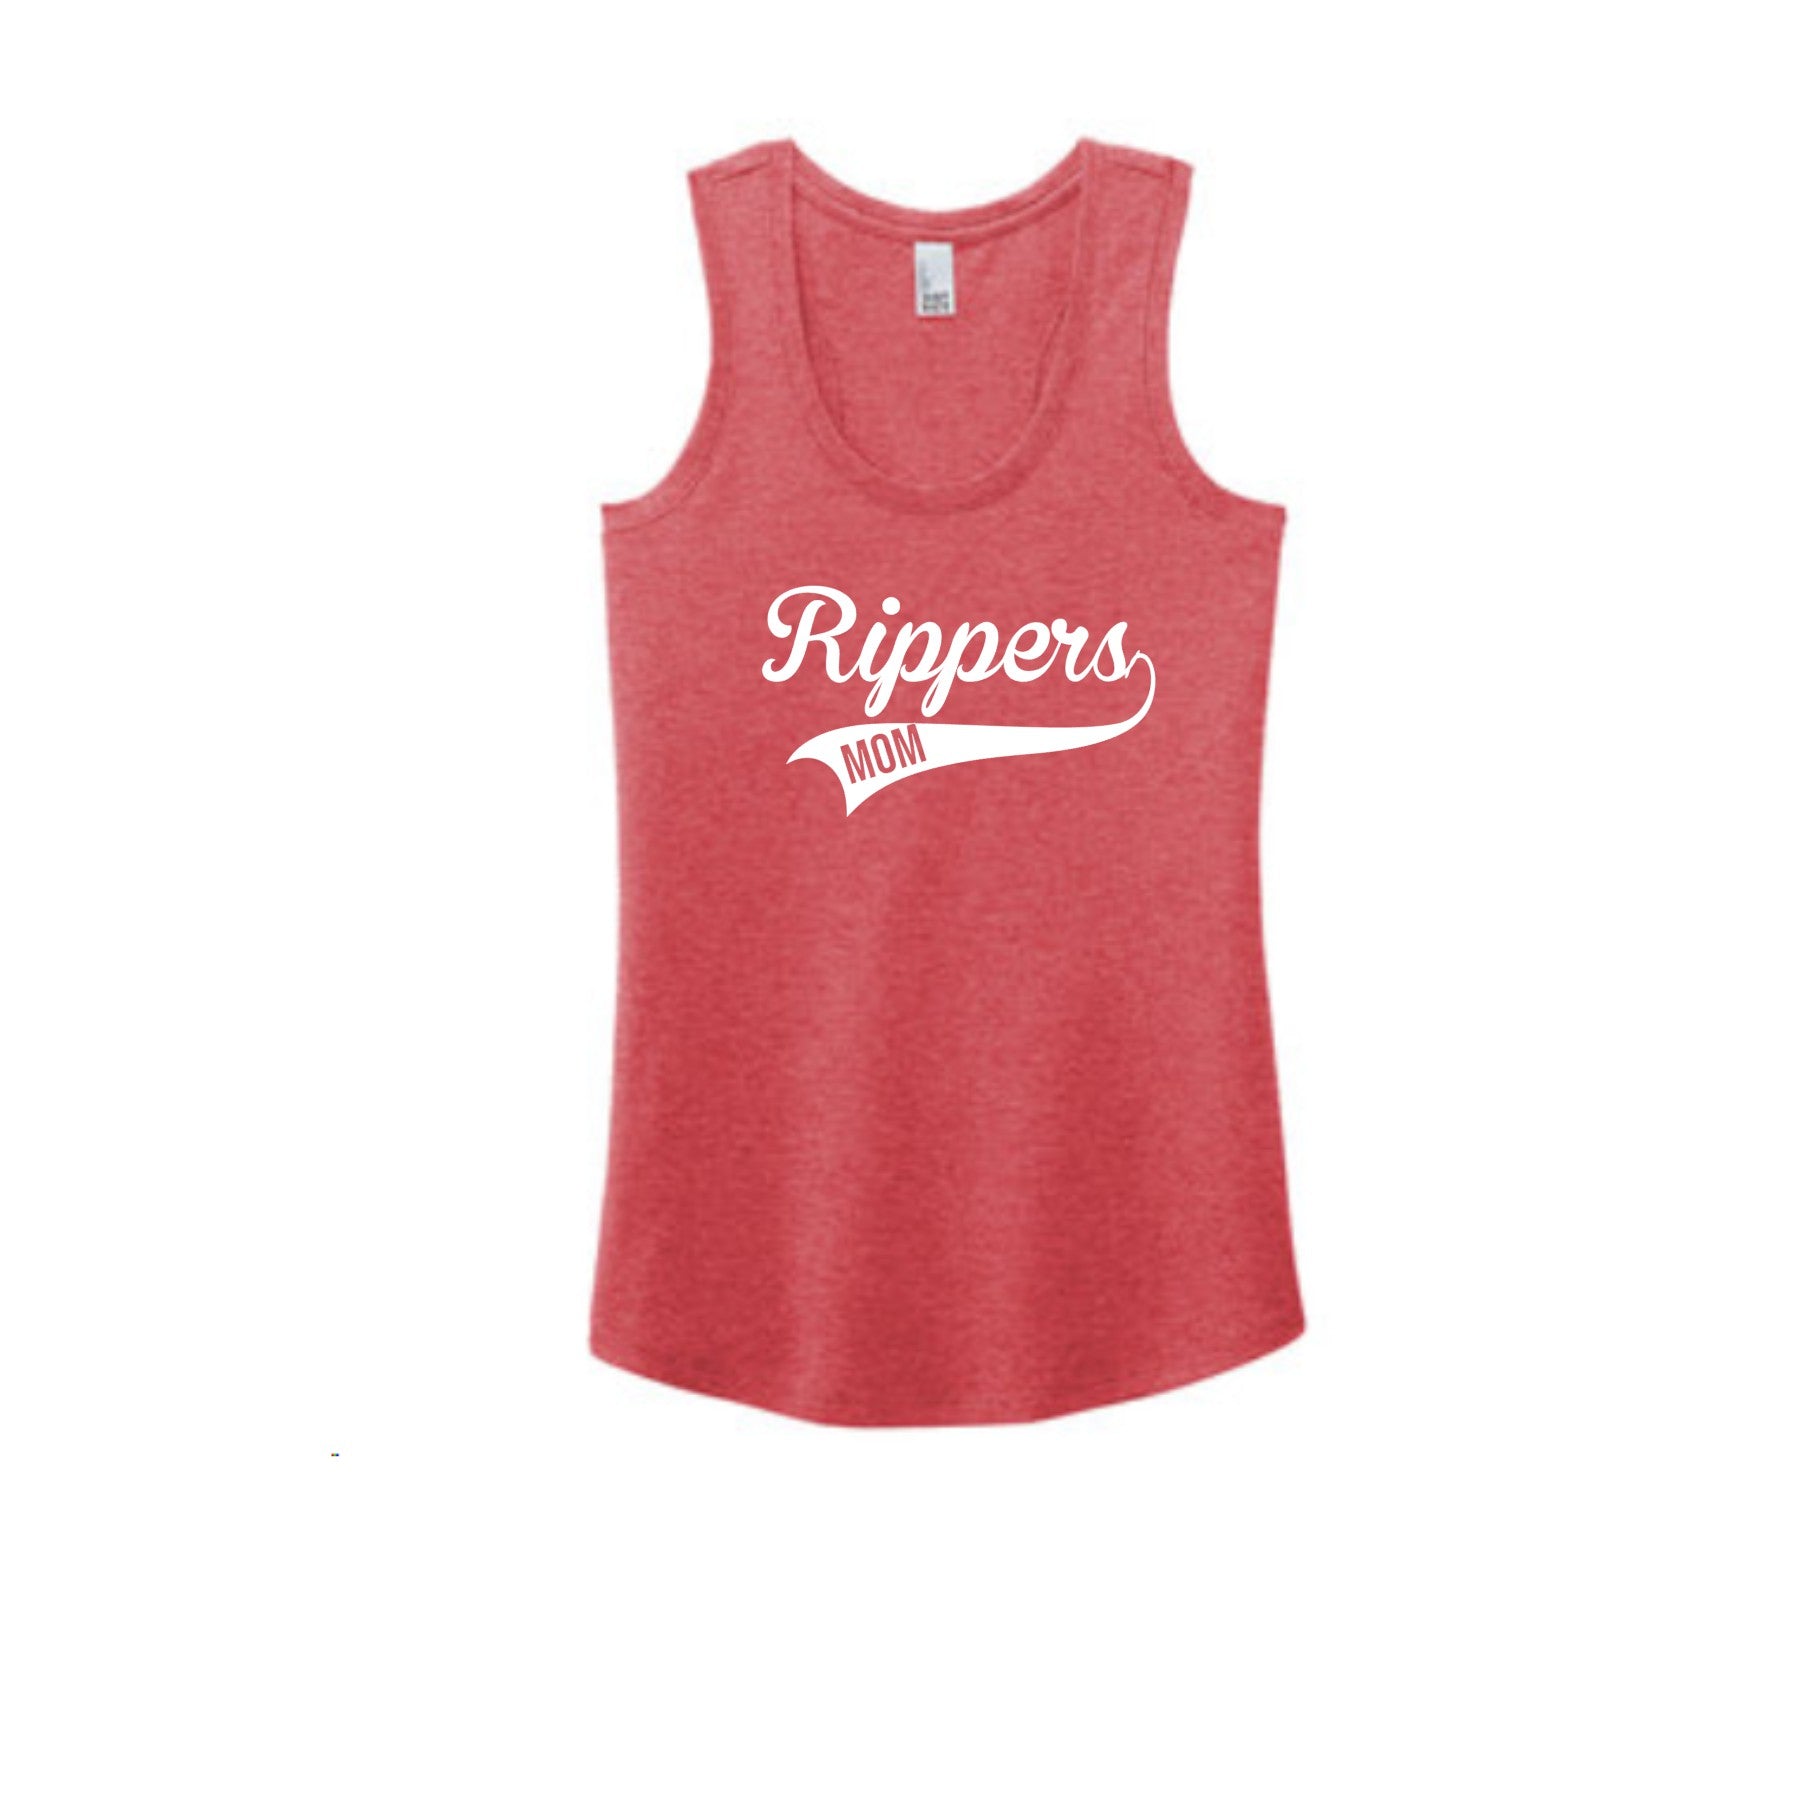 Rippers Baseball District Tank Top - red